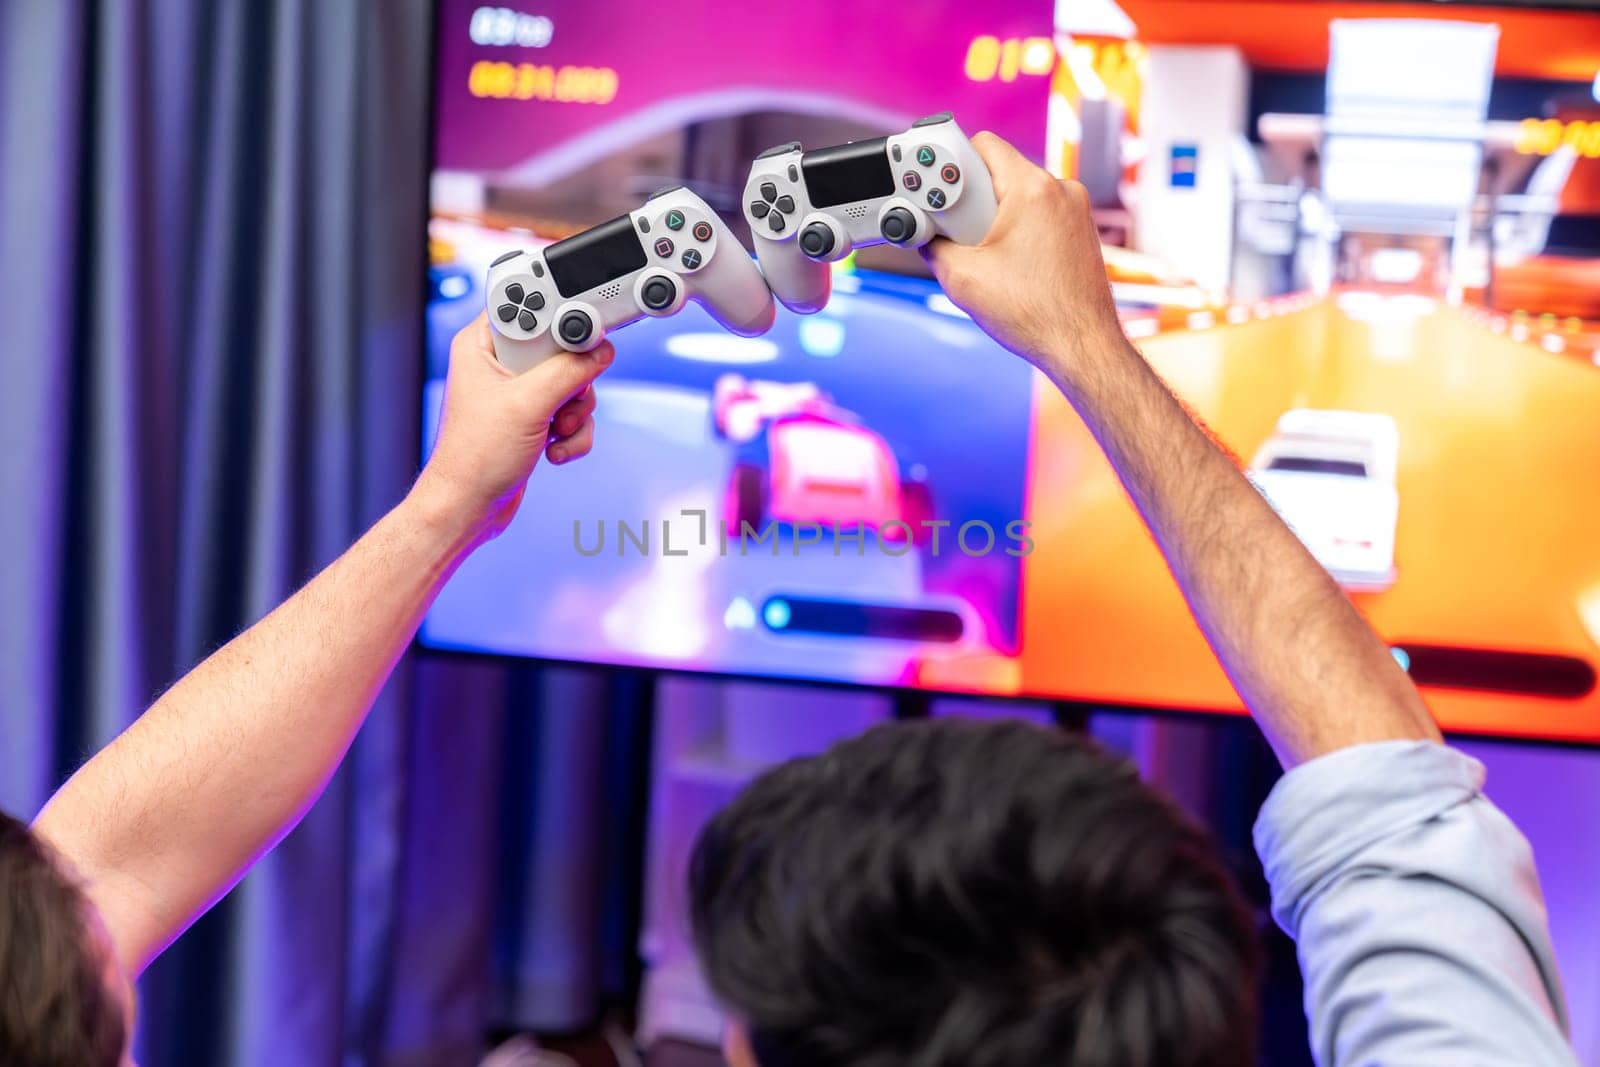 Close up photo of holding joystick crashing or cheerful friends on car racing competition of video game on blurred screen. Concept of lifestyles gamer on weekend with friend in living room. Sellable.